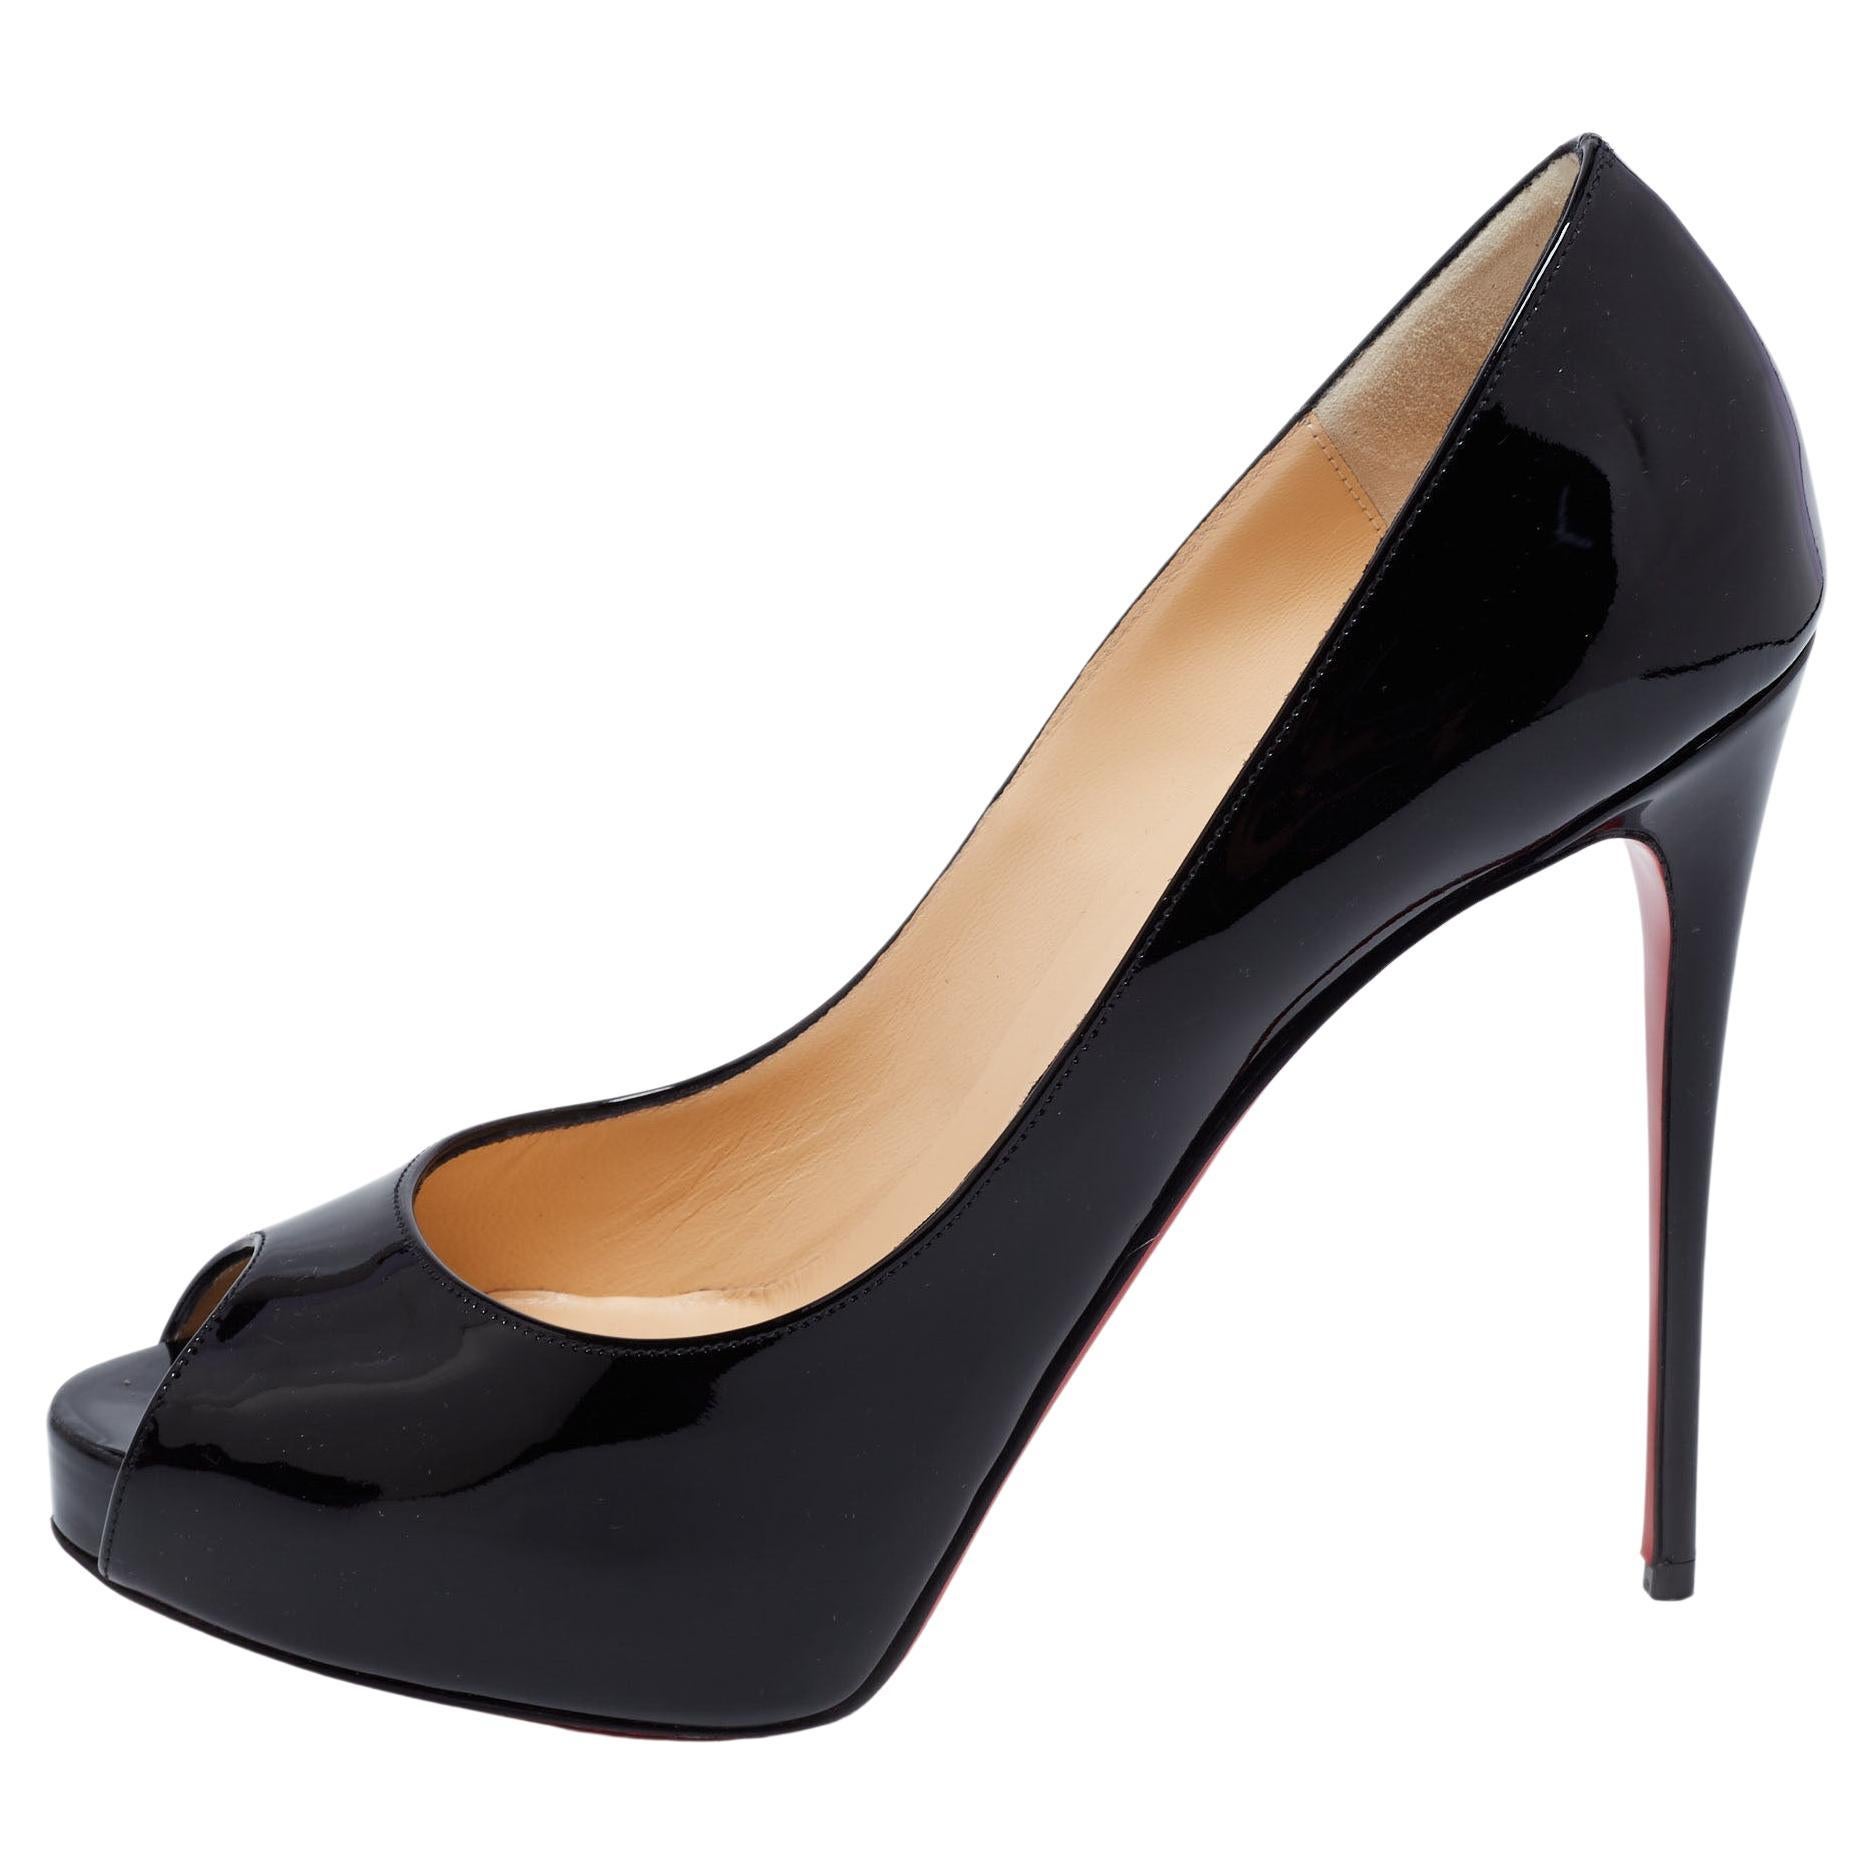 Christian Louboutin Black Patent Leather Very Prive Peep-Toe Pumps Size 38.5 For Sale